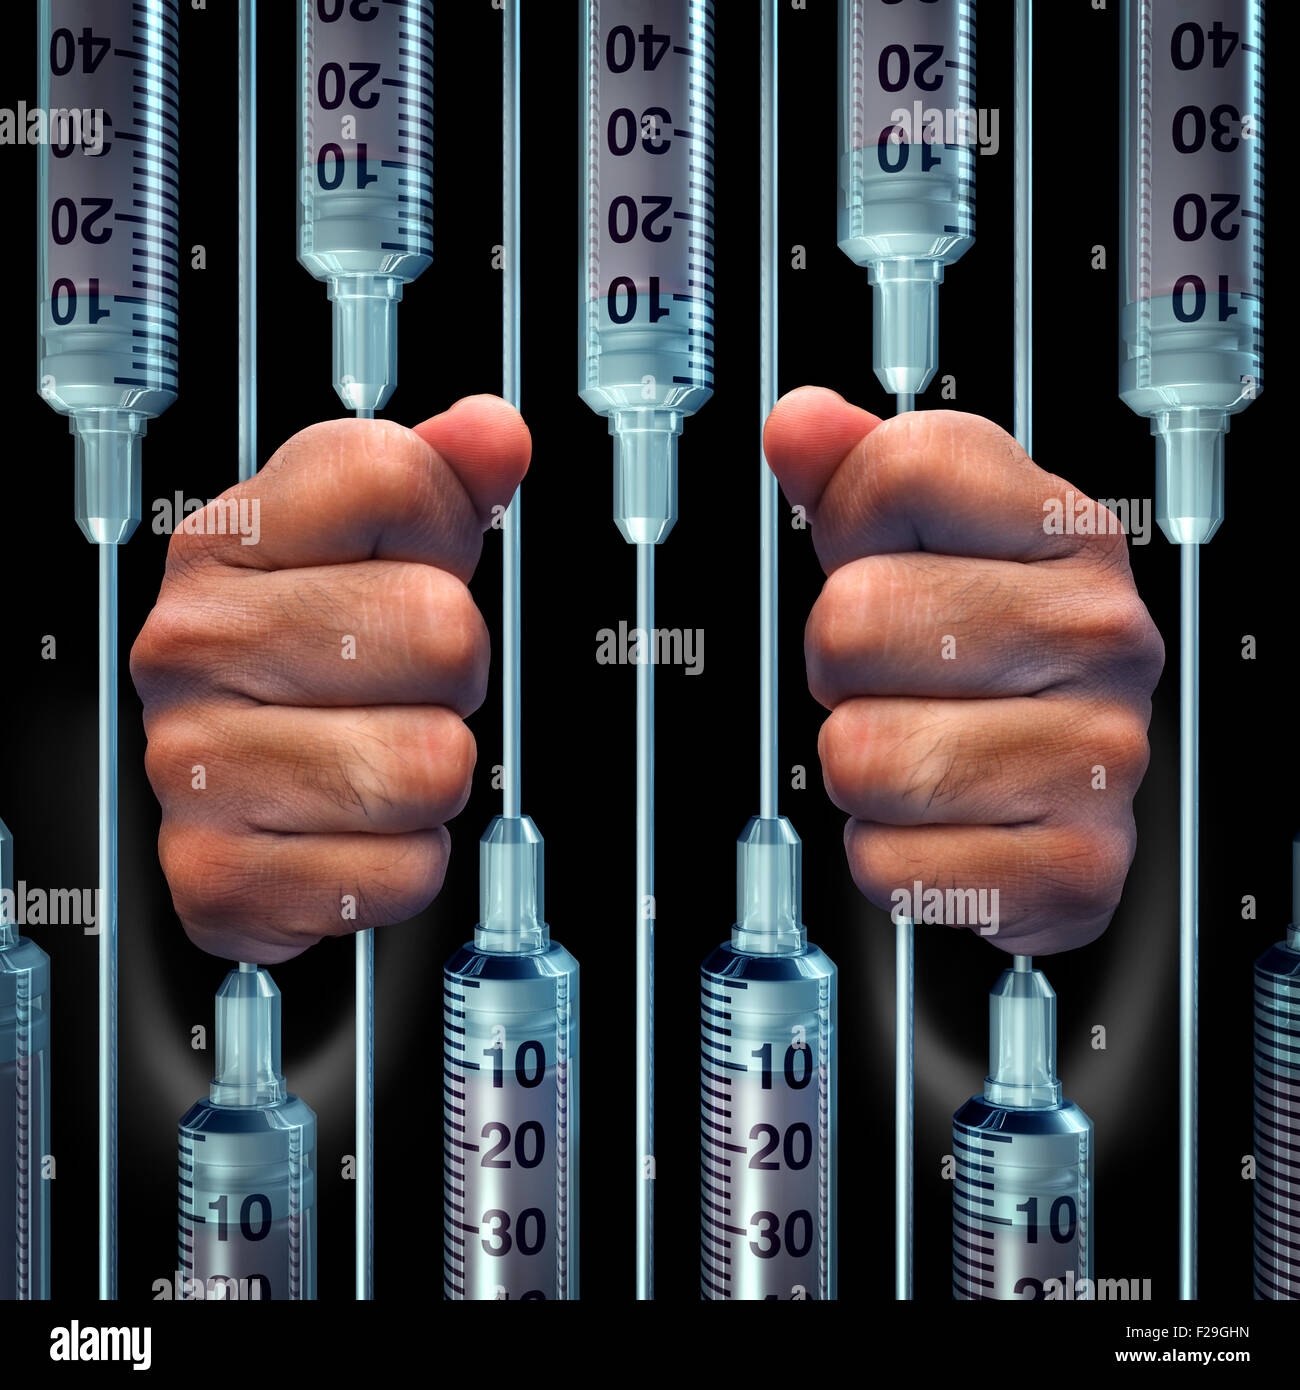 Medical crime concept and criminal doctor malpractice negligence symbol as hands holding a group of syringes as prison or jail bars as an icon for health care trap or medicine addiction. Stock Photo